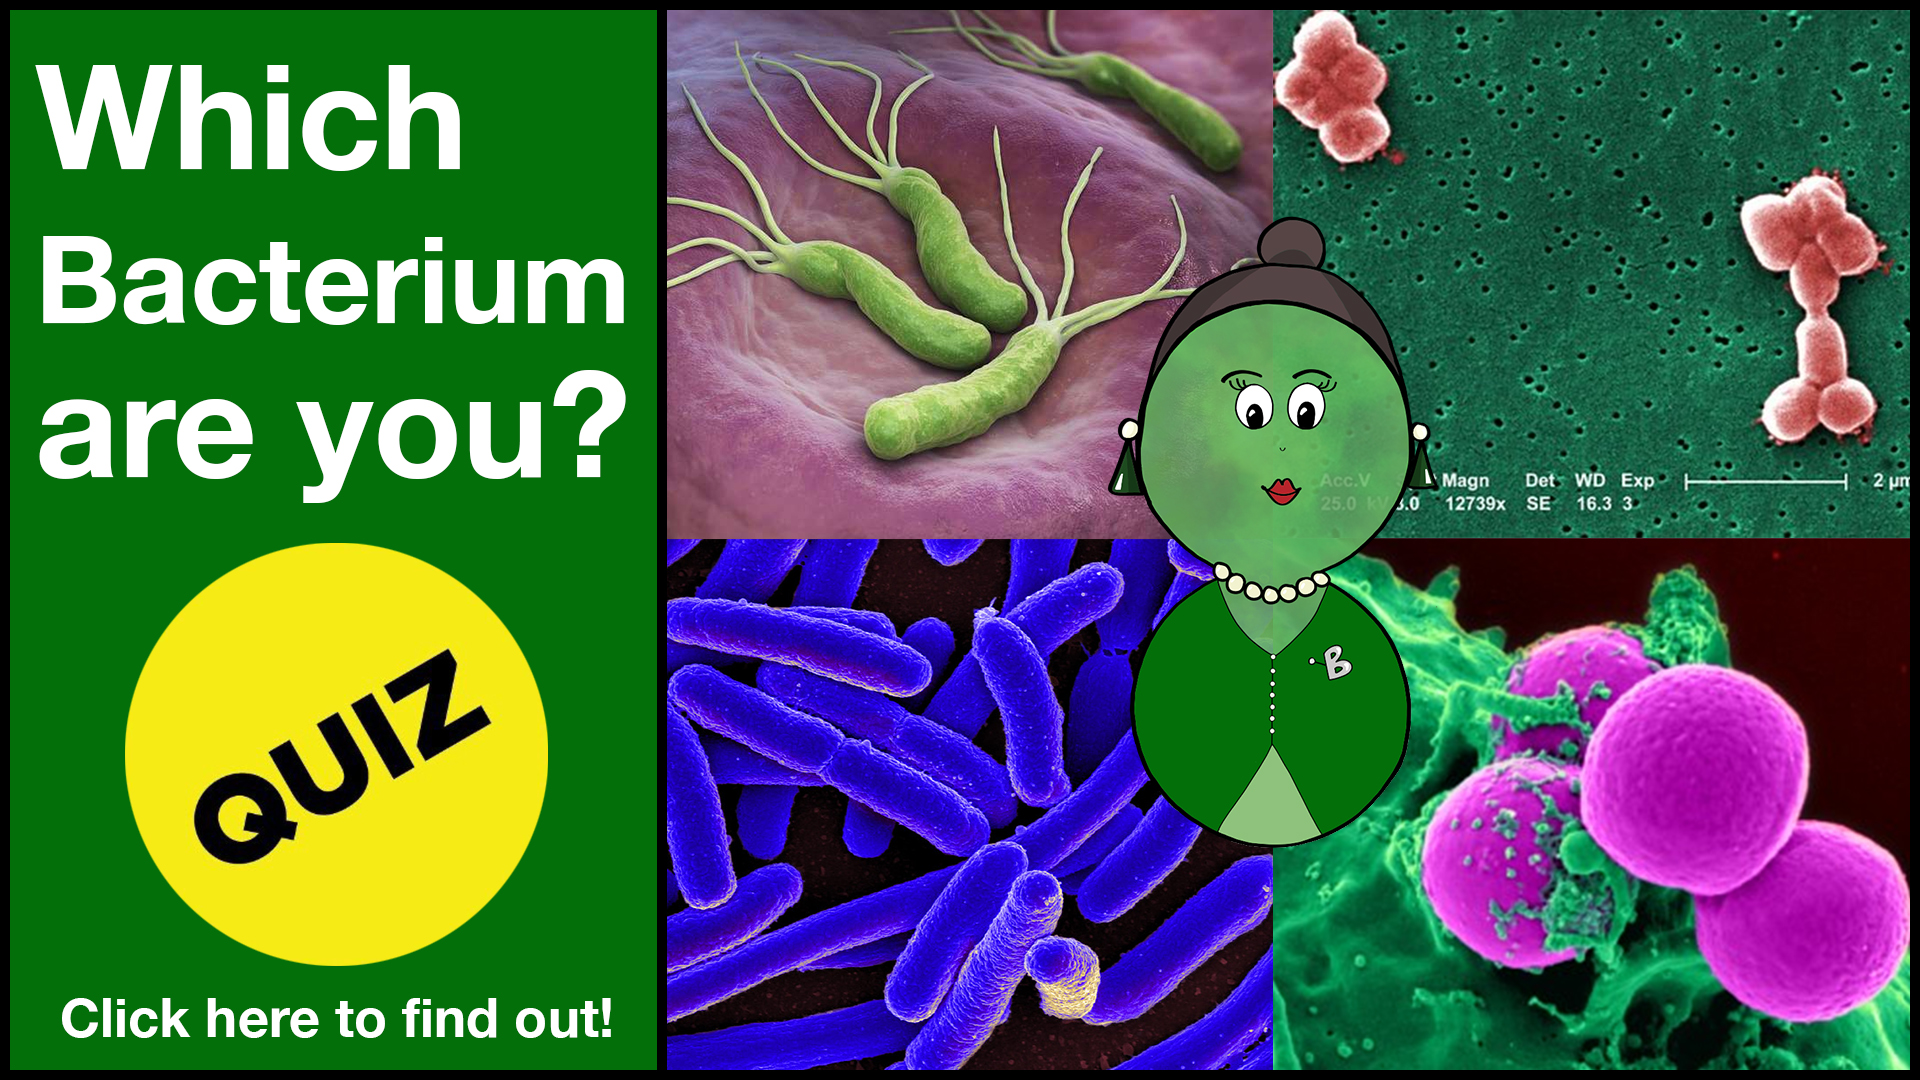 Which Bacterium are you?